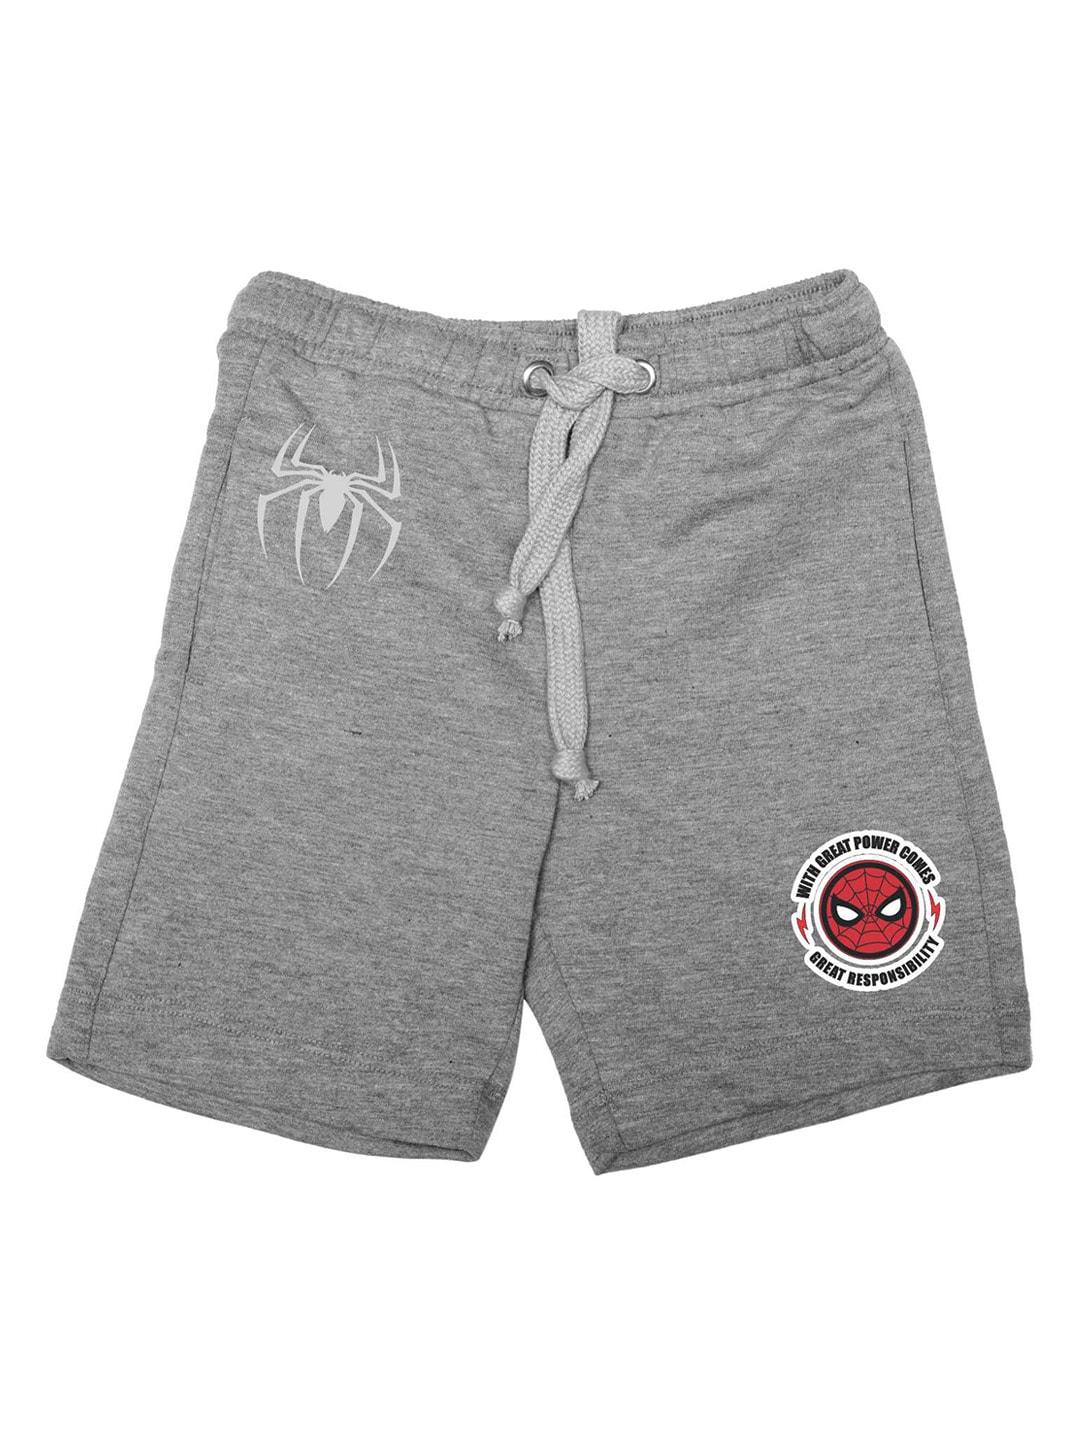 marvel by wear your mind boys grey printed regular fit sports shorts